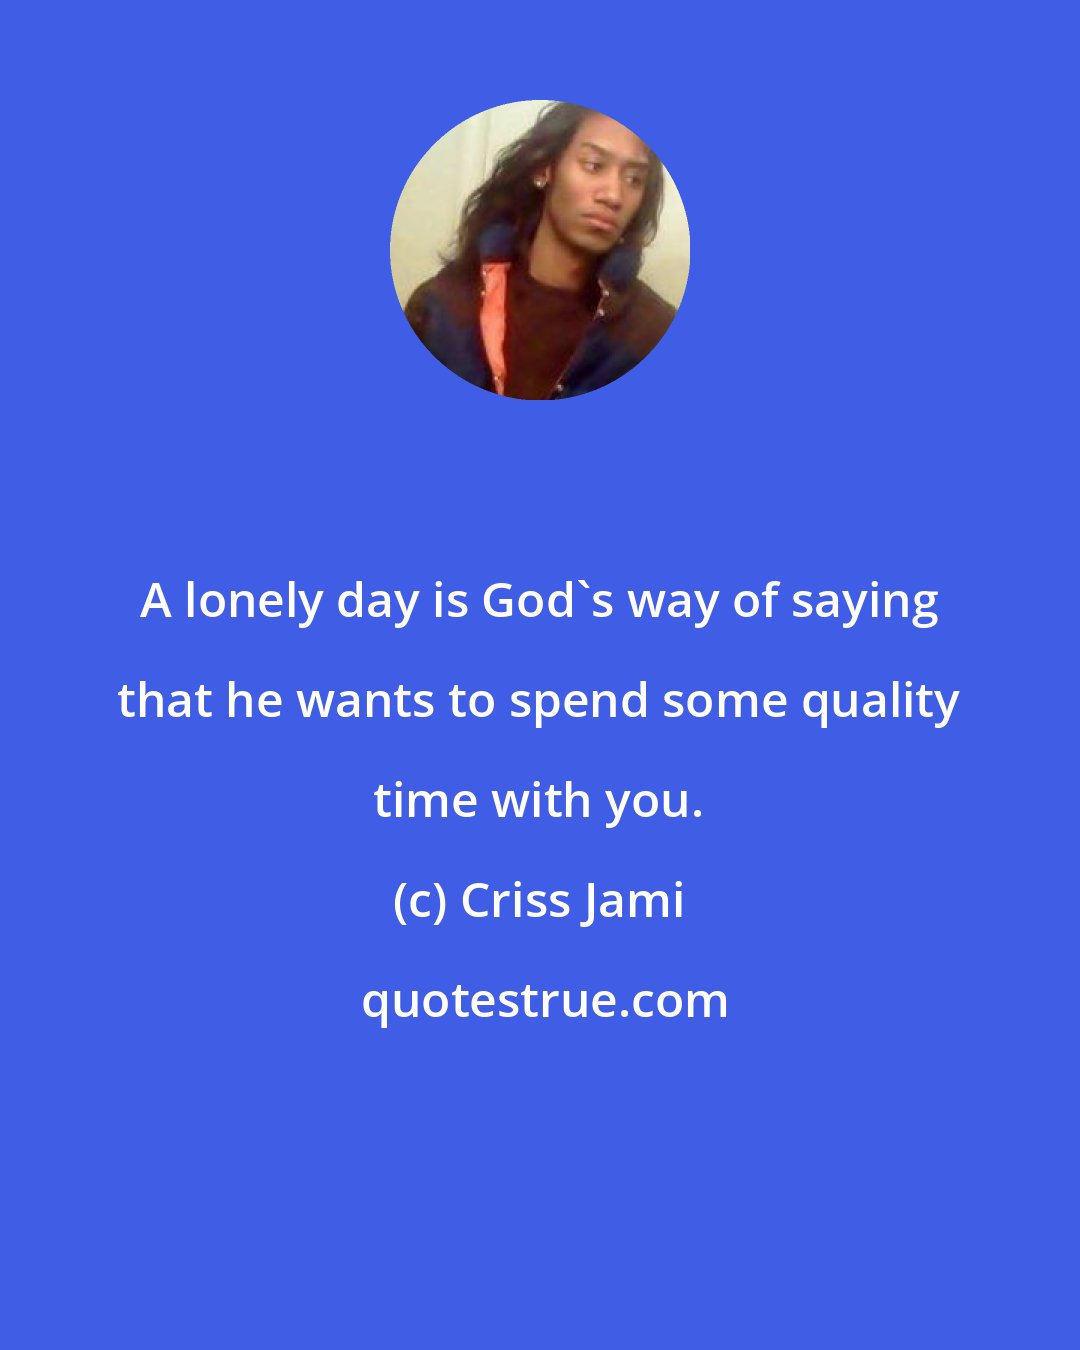 Criss Jami: A lonely day is God's way of saying that he wants to spend some quality time with you.